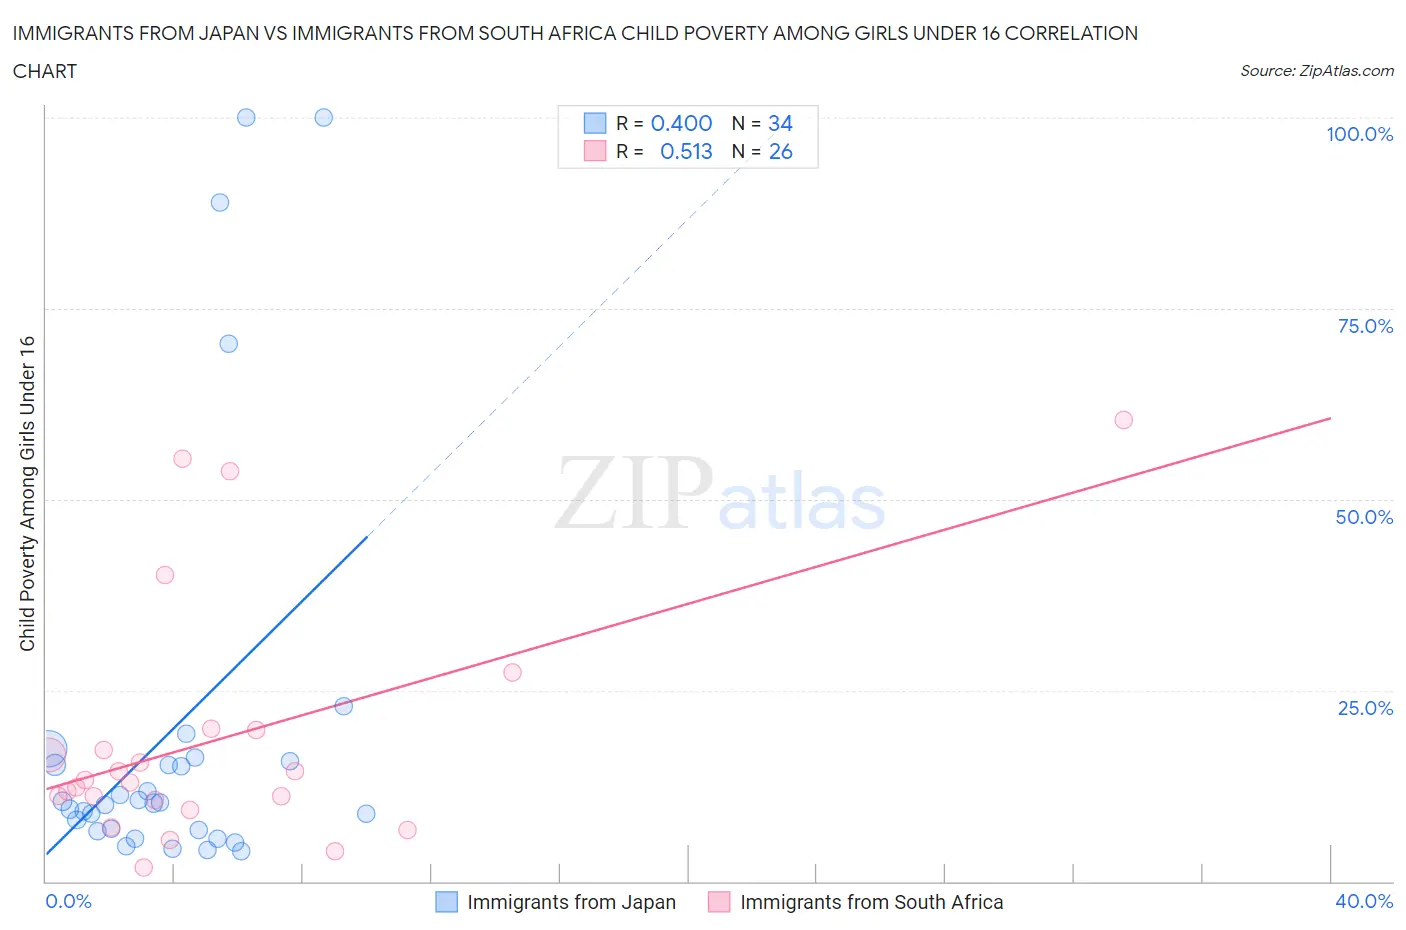 Immigrants from Japan vs Immigrants from South Africa Child Poverty Among Girls Under 16